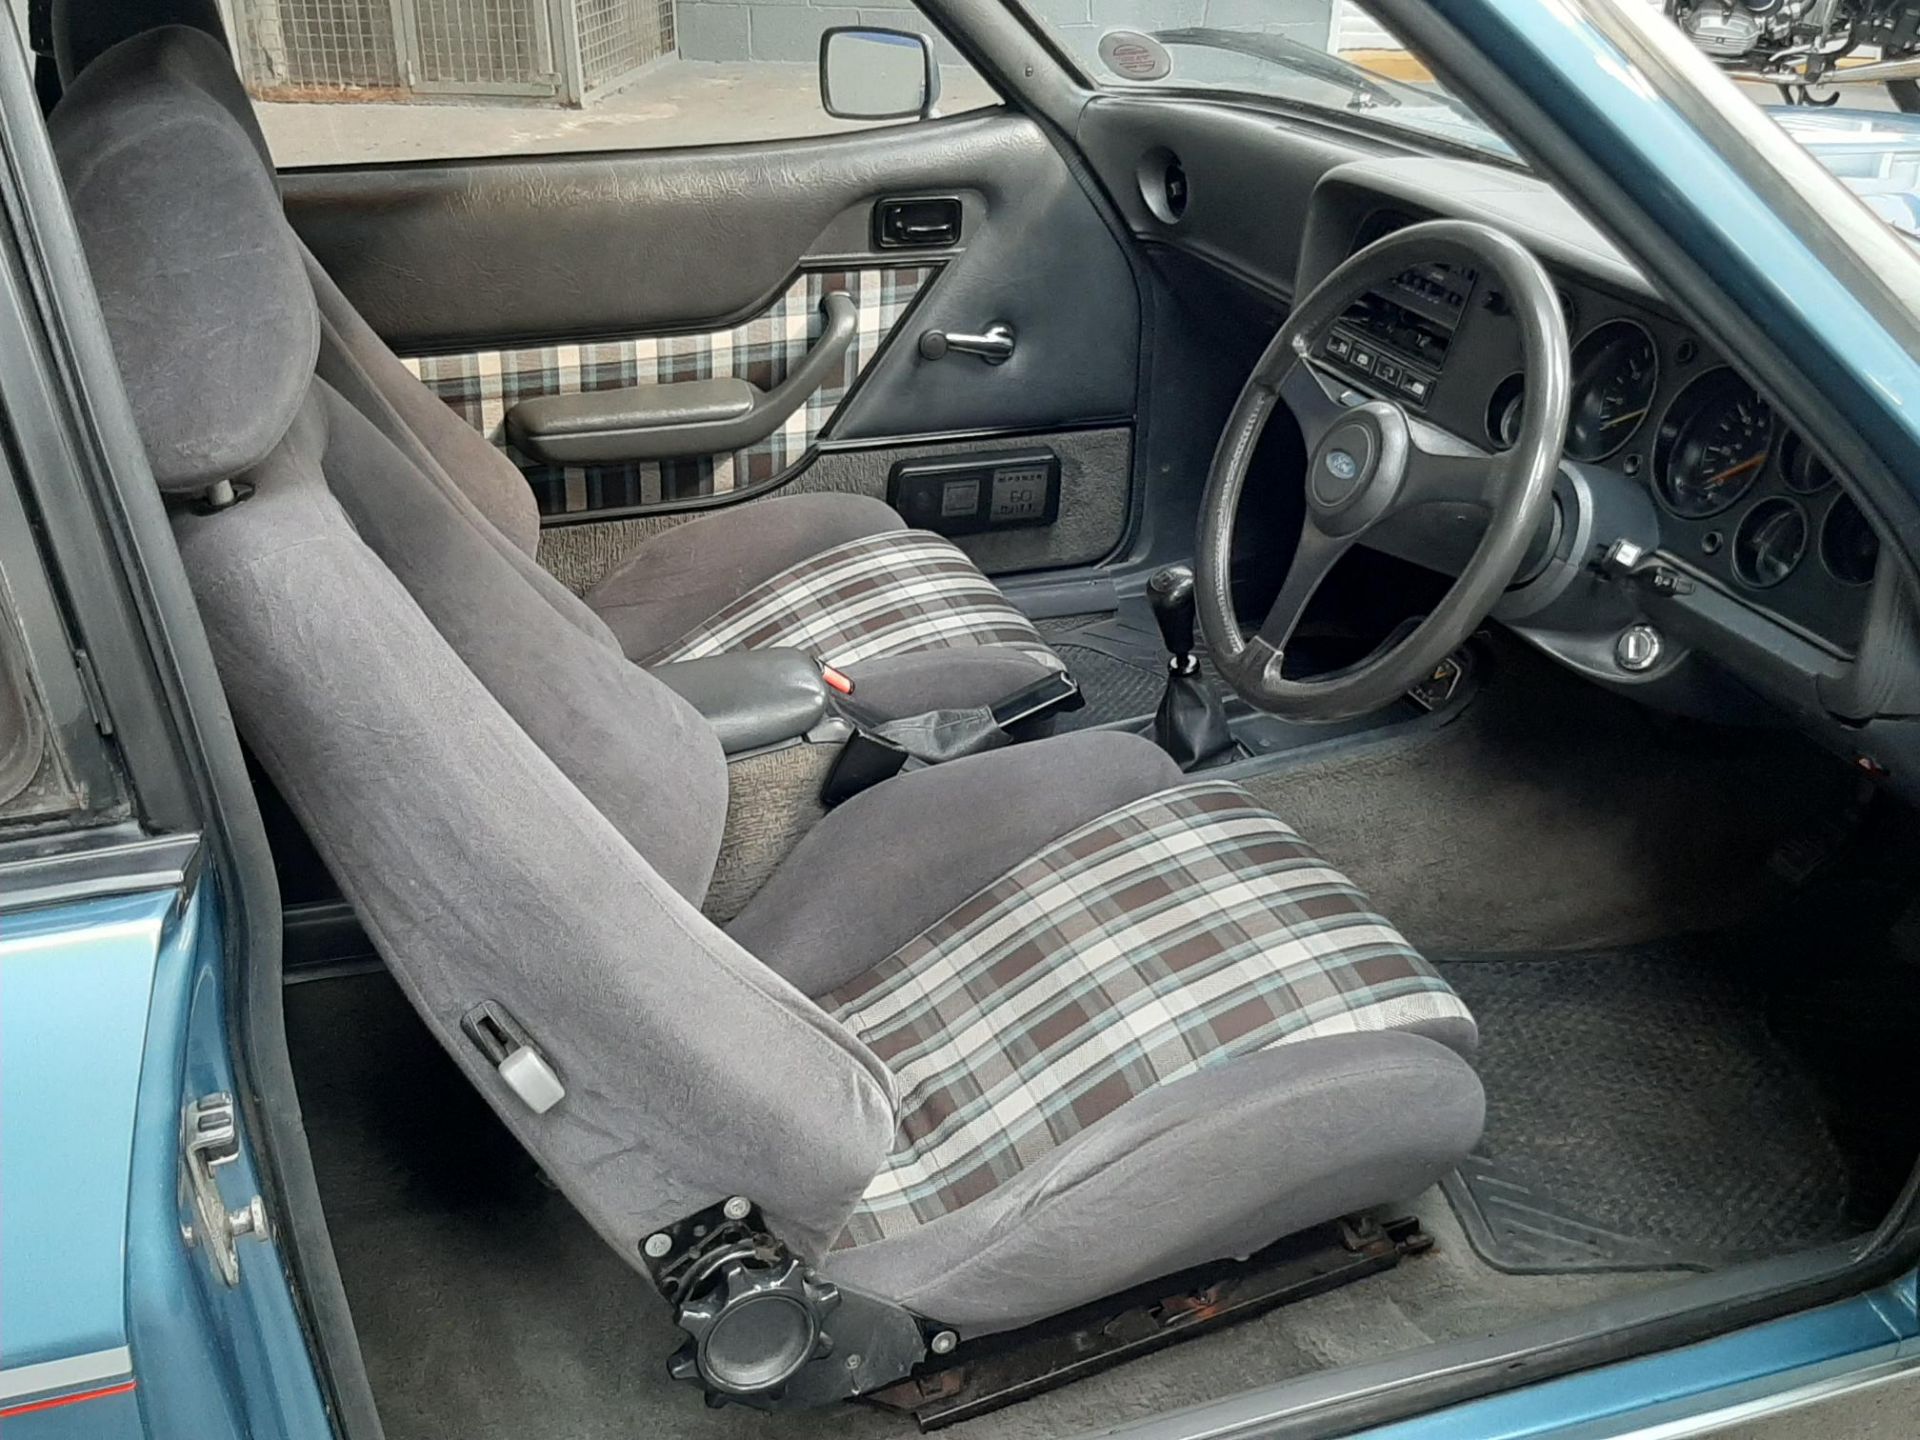 1982 Ford Capri 2.8 Injection - Image 9 of 23